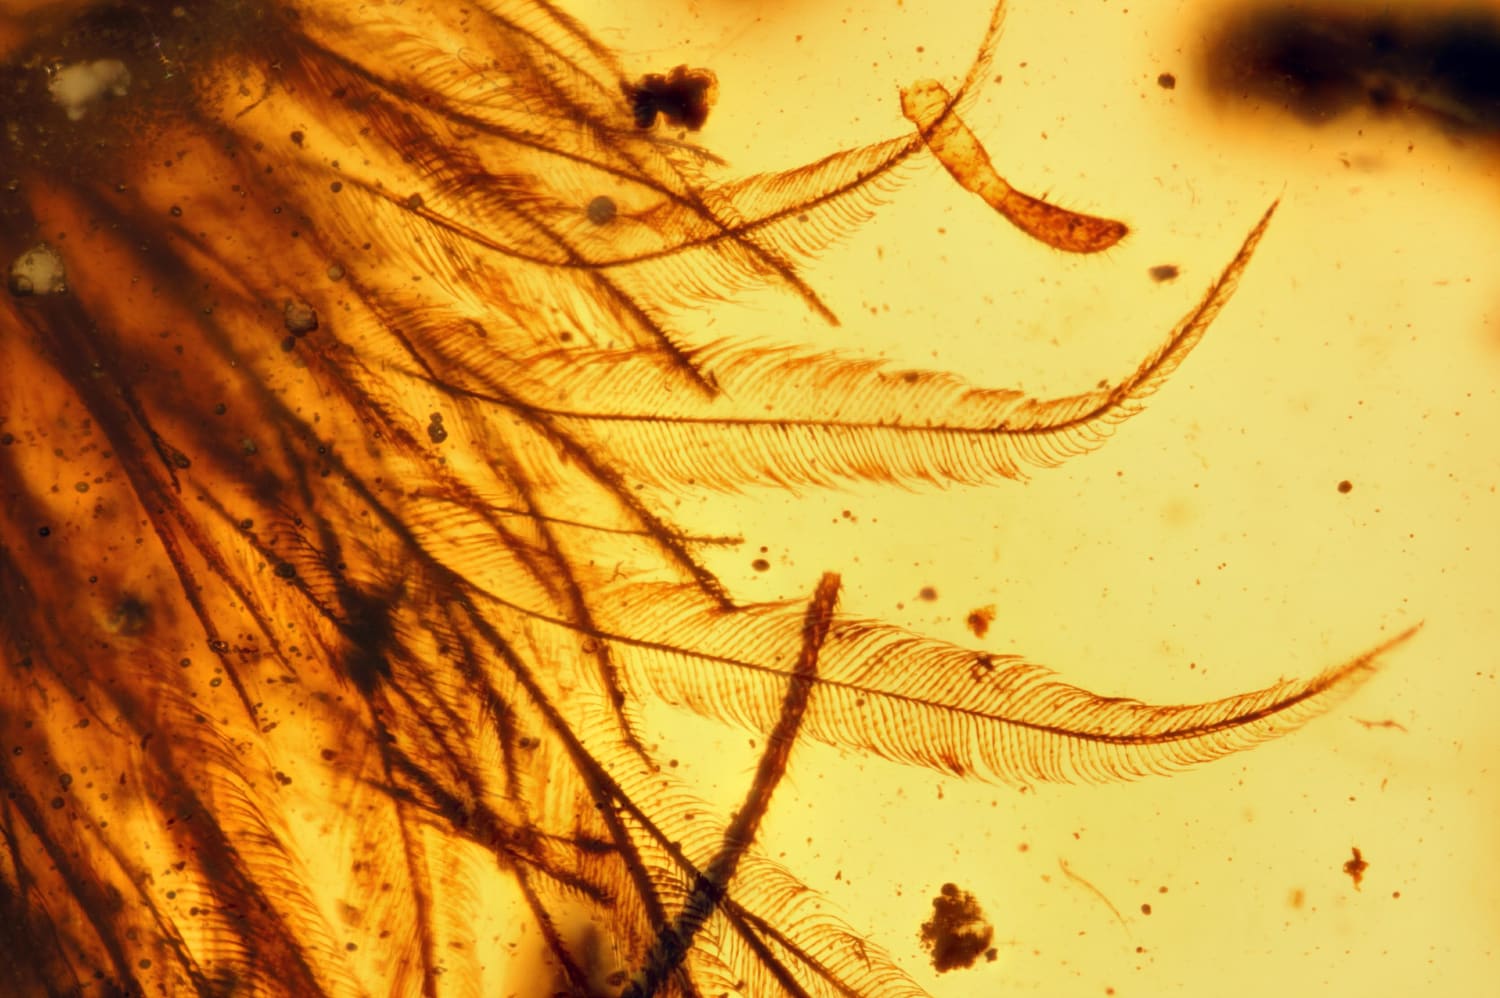 Microscopic image of the feathered tail of a 99-million-year-old coelurosaur preserved in Burmese amber: the velcro-like hooks projecting from each of the barbules allowed the feathers to lie flat against each other like fronds as in modern birds.